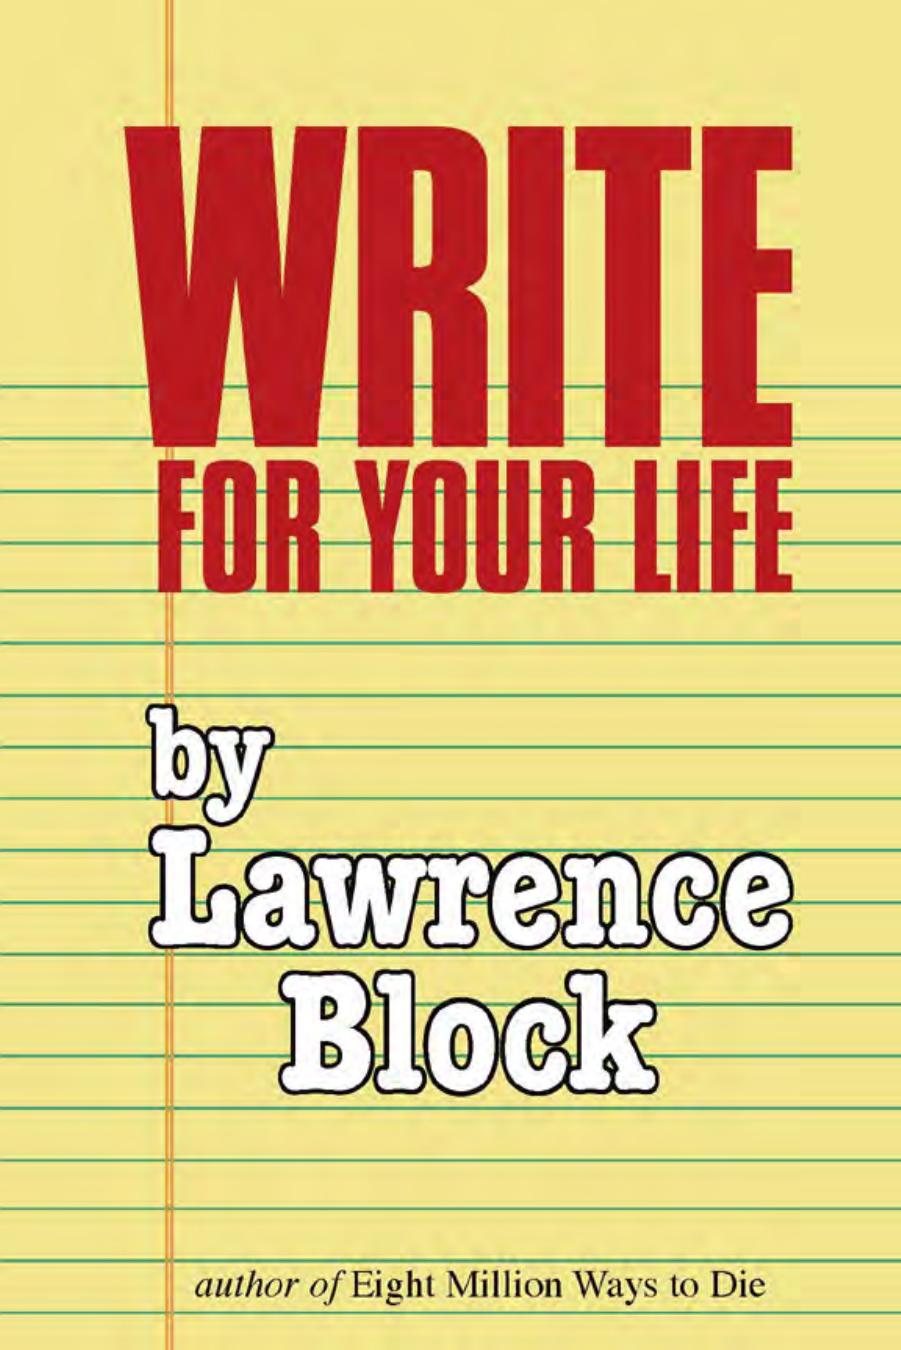 Write for Your Life by Lawrence Block